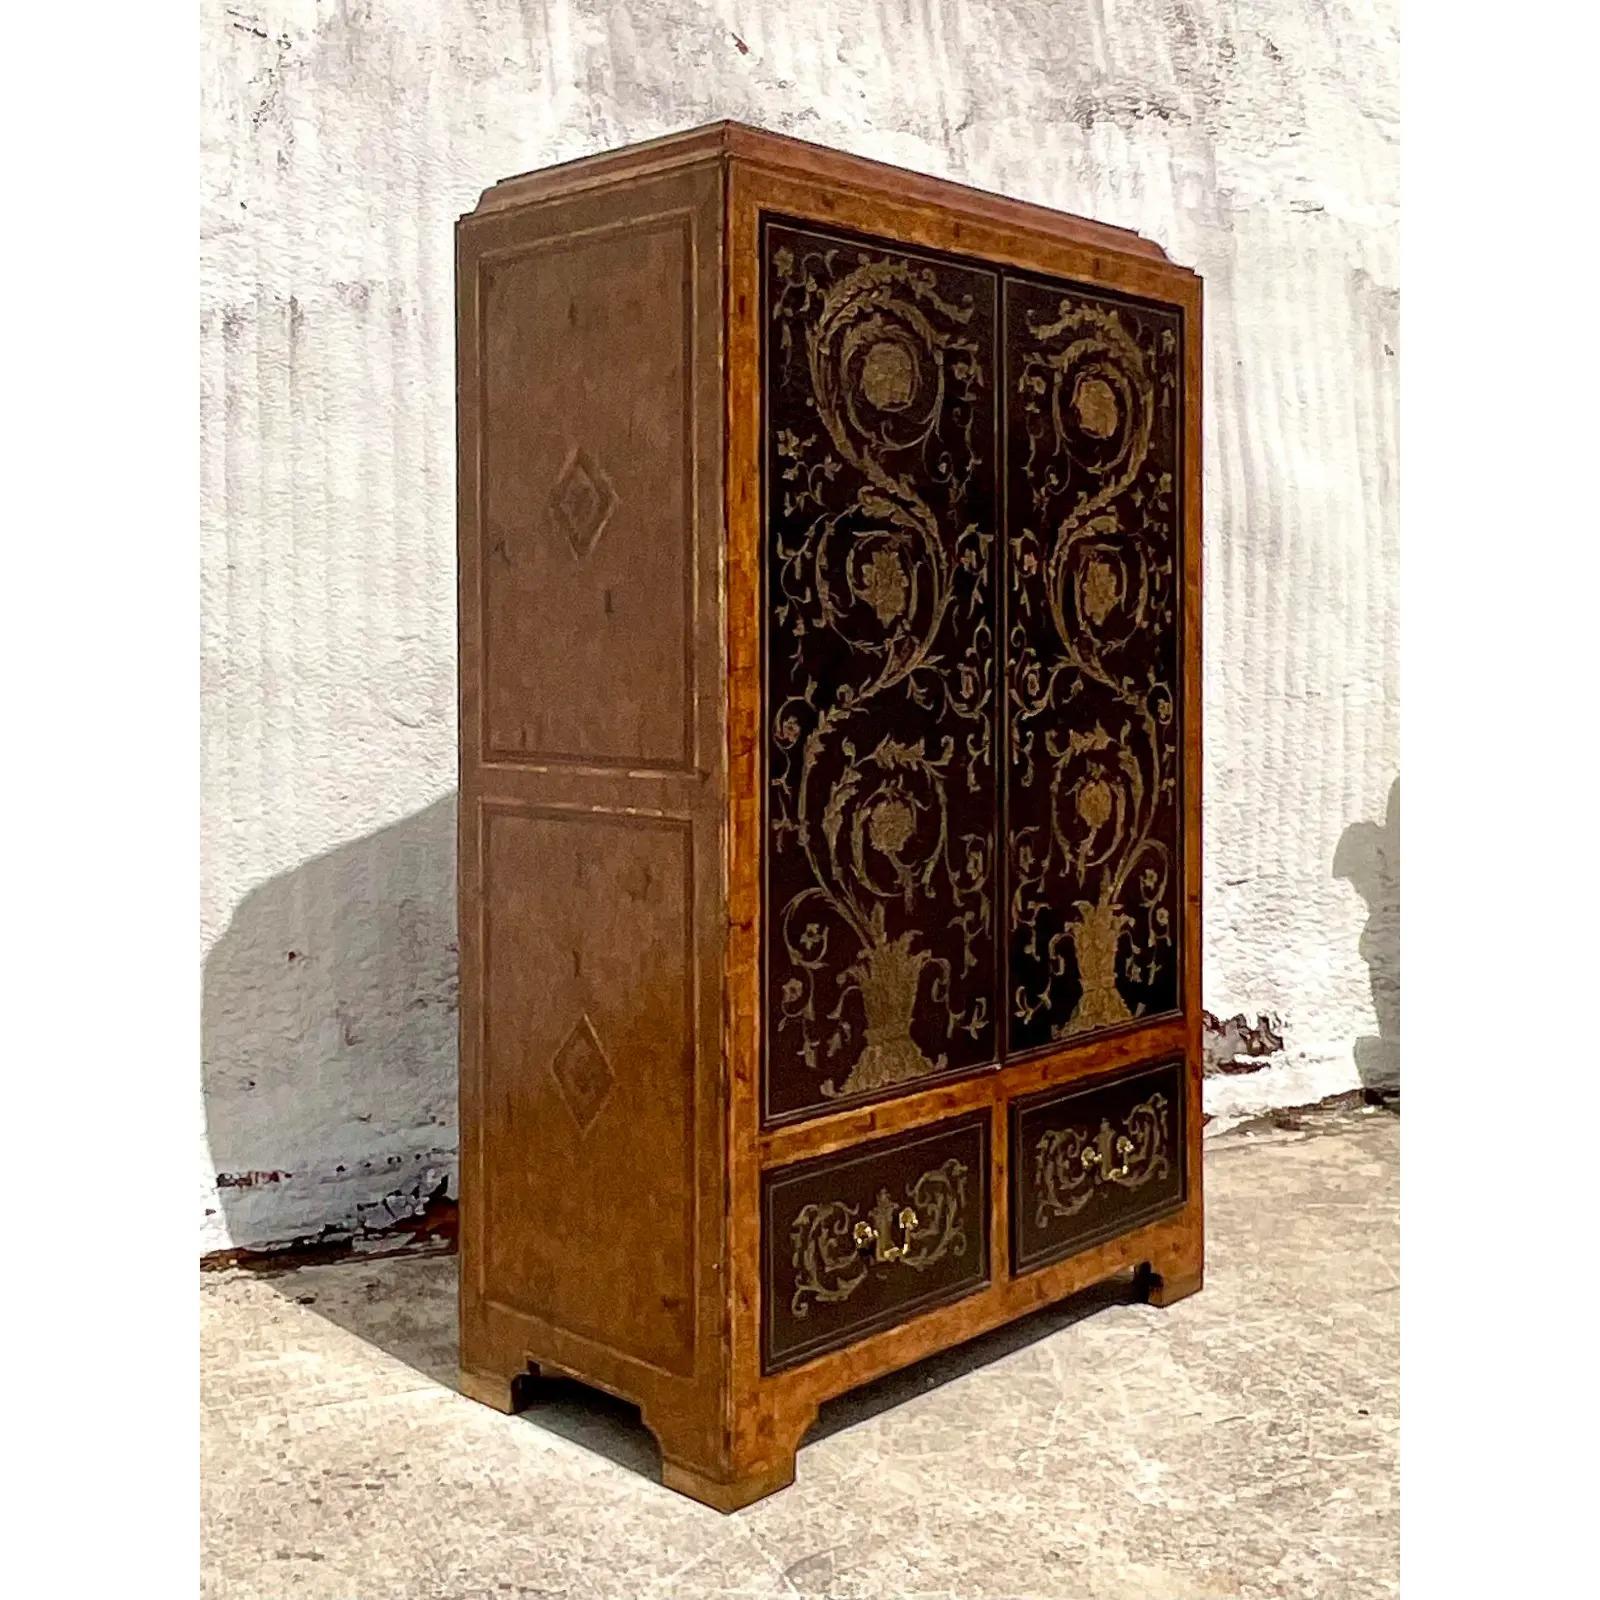 Fantastic vintage Regency armoire. Made by the iconic Maitland Smith group. Beautiful hand carved lacquer finish with a polished wood cabinet. Currently outfitted as a TV console, but easily converted to hanging or a chic mirrored dry bar. Tagged in